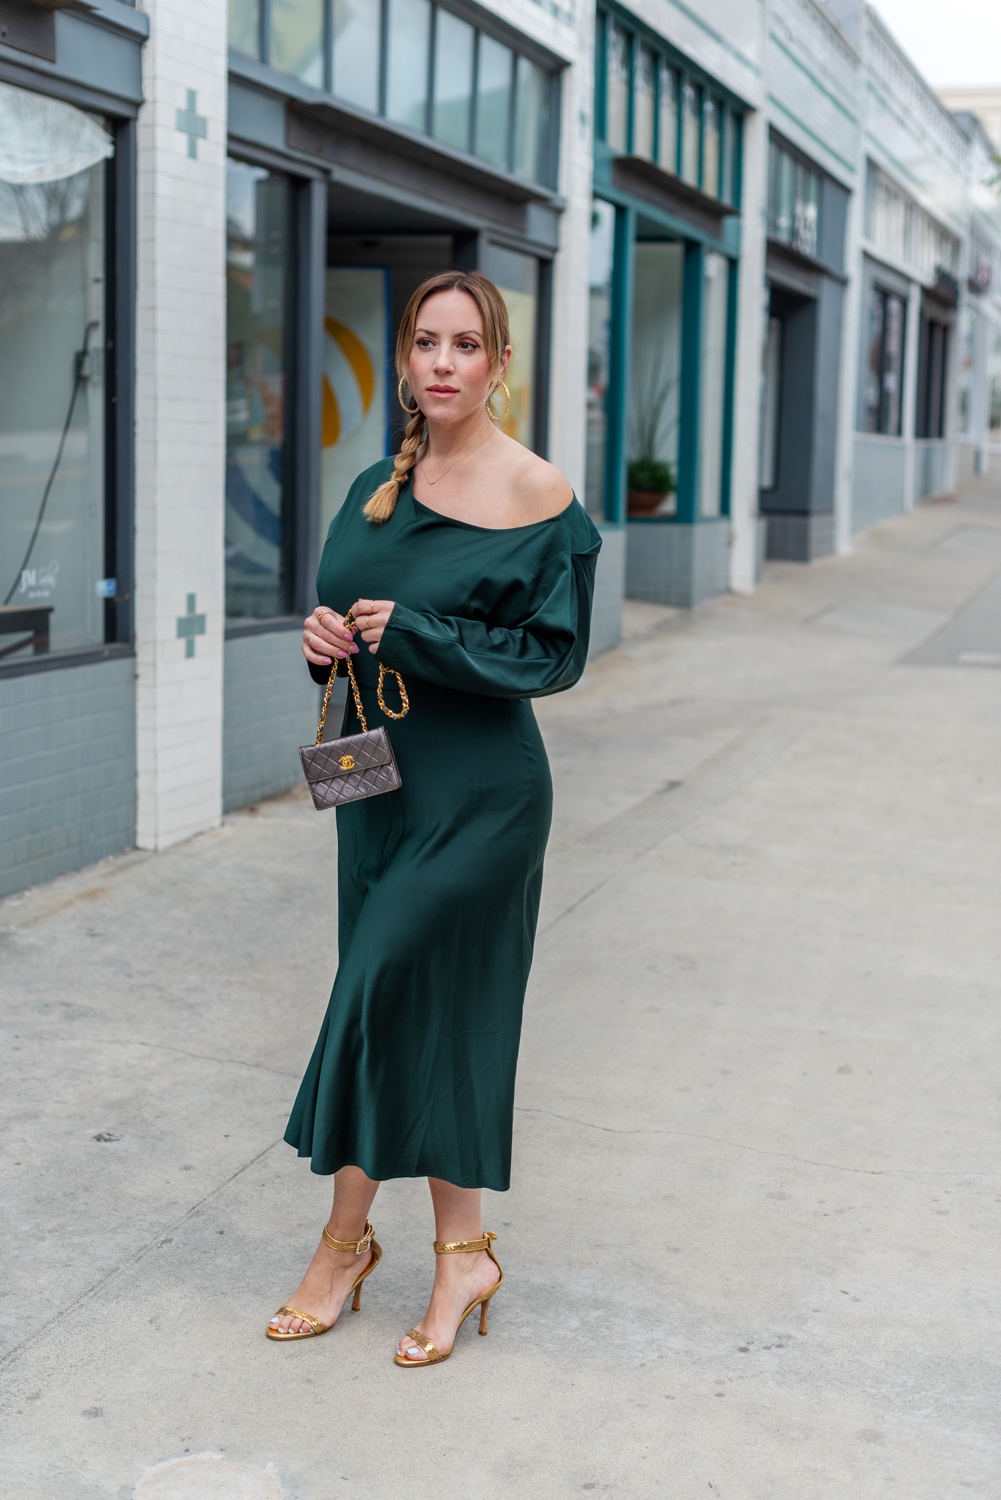 Here's Why an Asymmetrical Neckline Dress is Great for Your